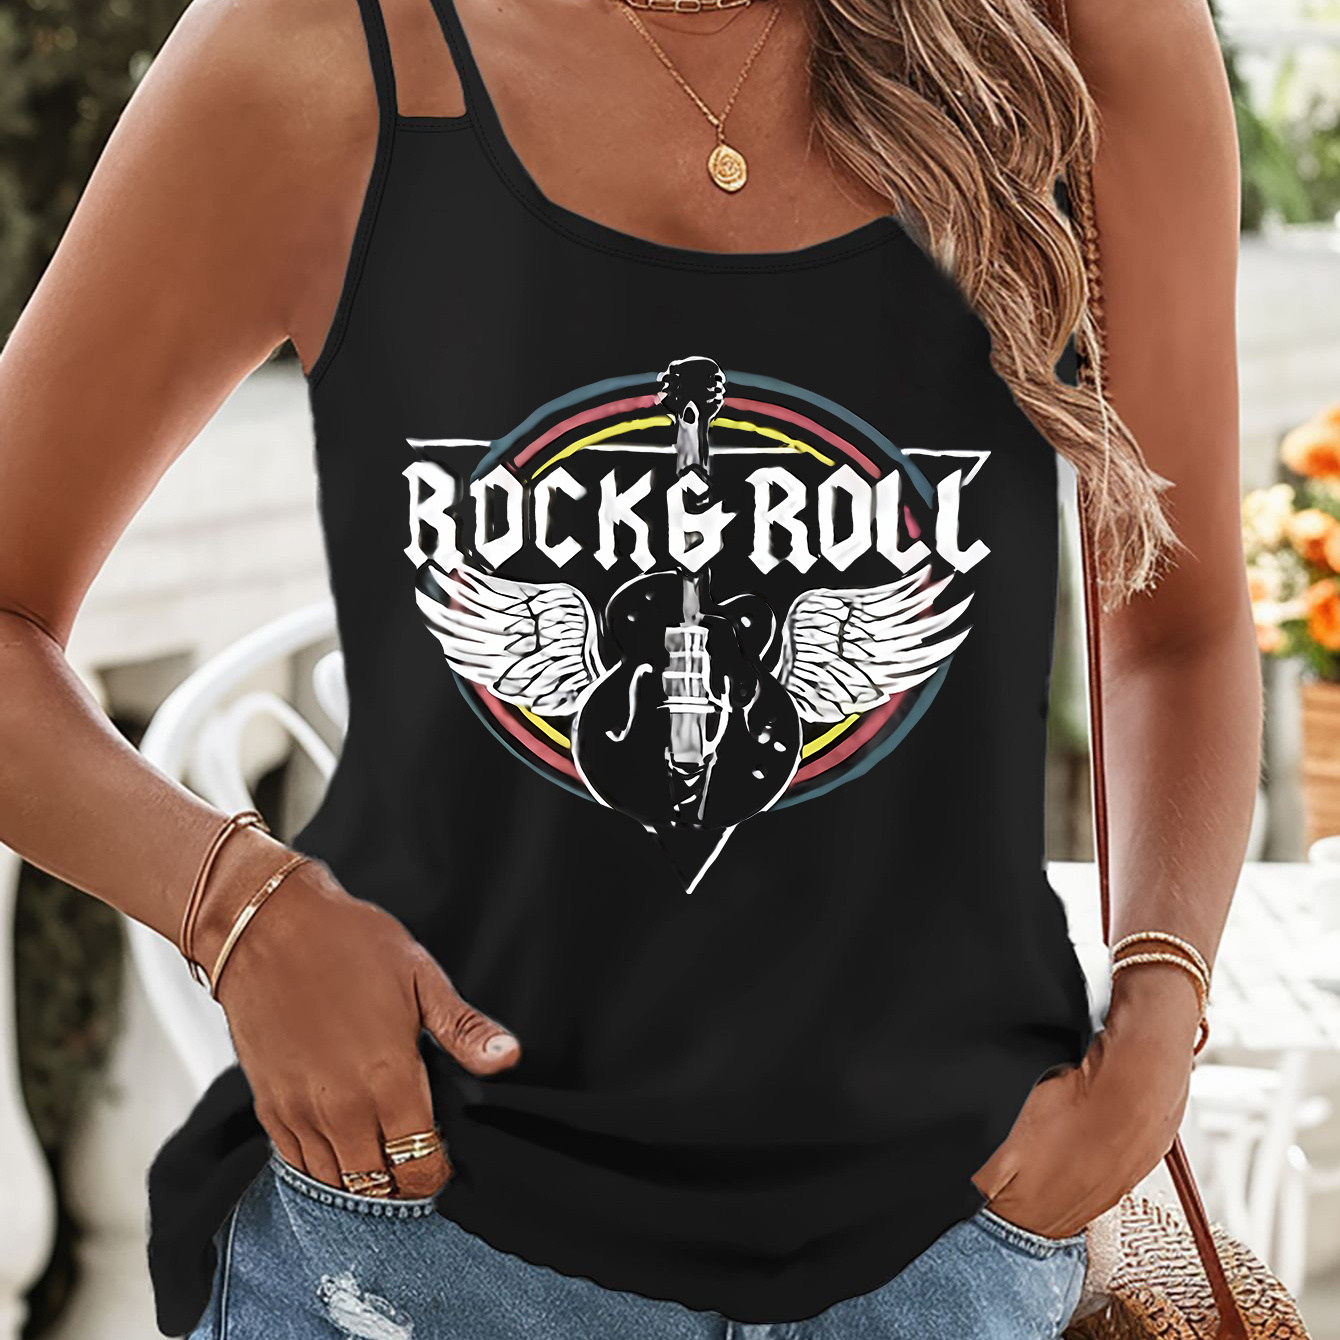 

Rock & Roll Print Double Straps Top, Casual Sleeveless Cami Top For Summer, Women's Clothing